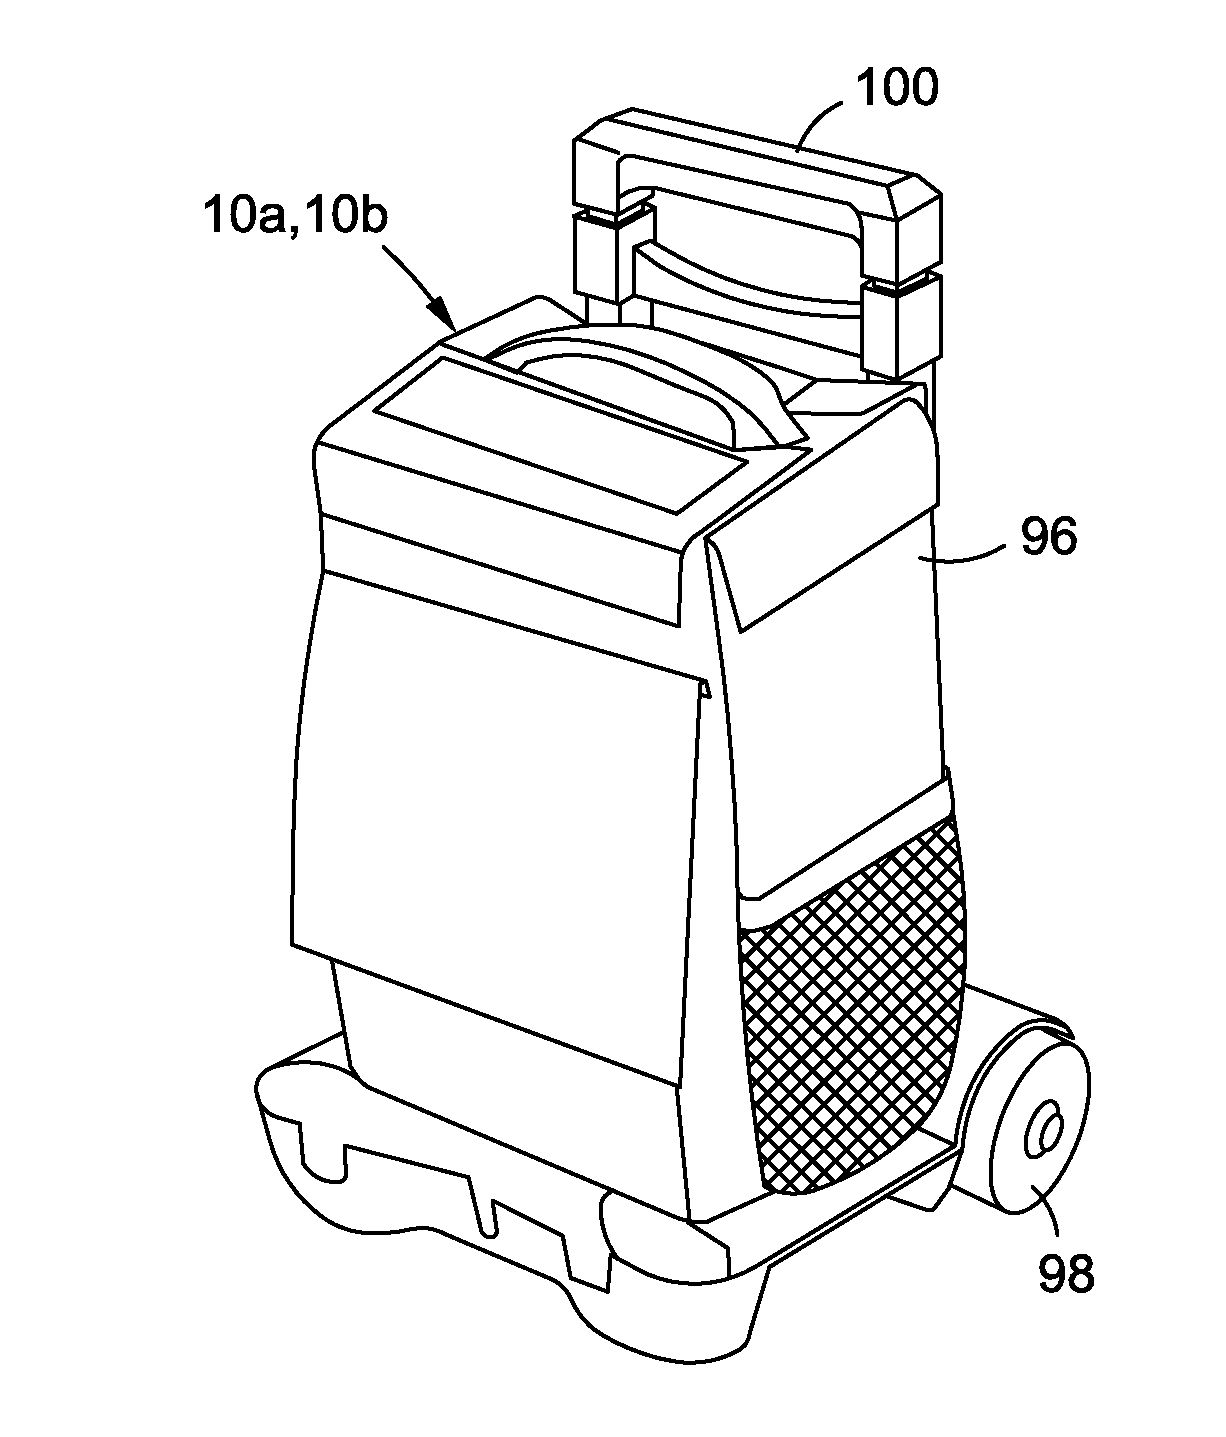 Oxygen concentrator for high pressure oxygen delivery with oxygen circulation loop and improved portability